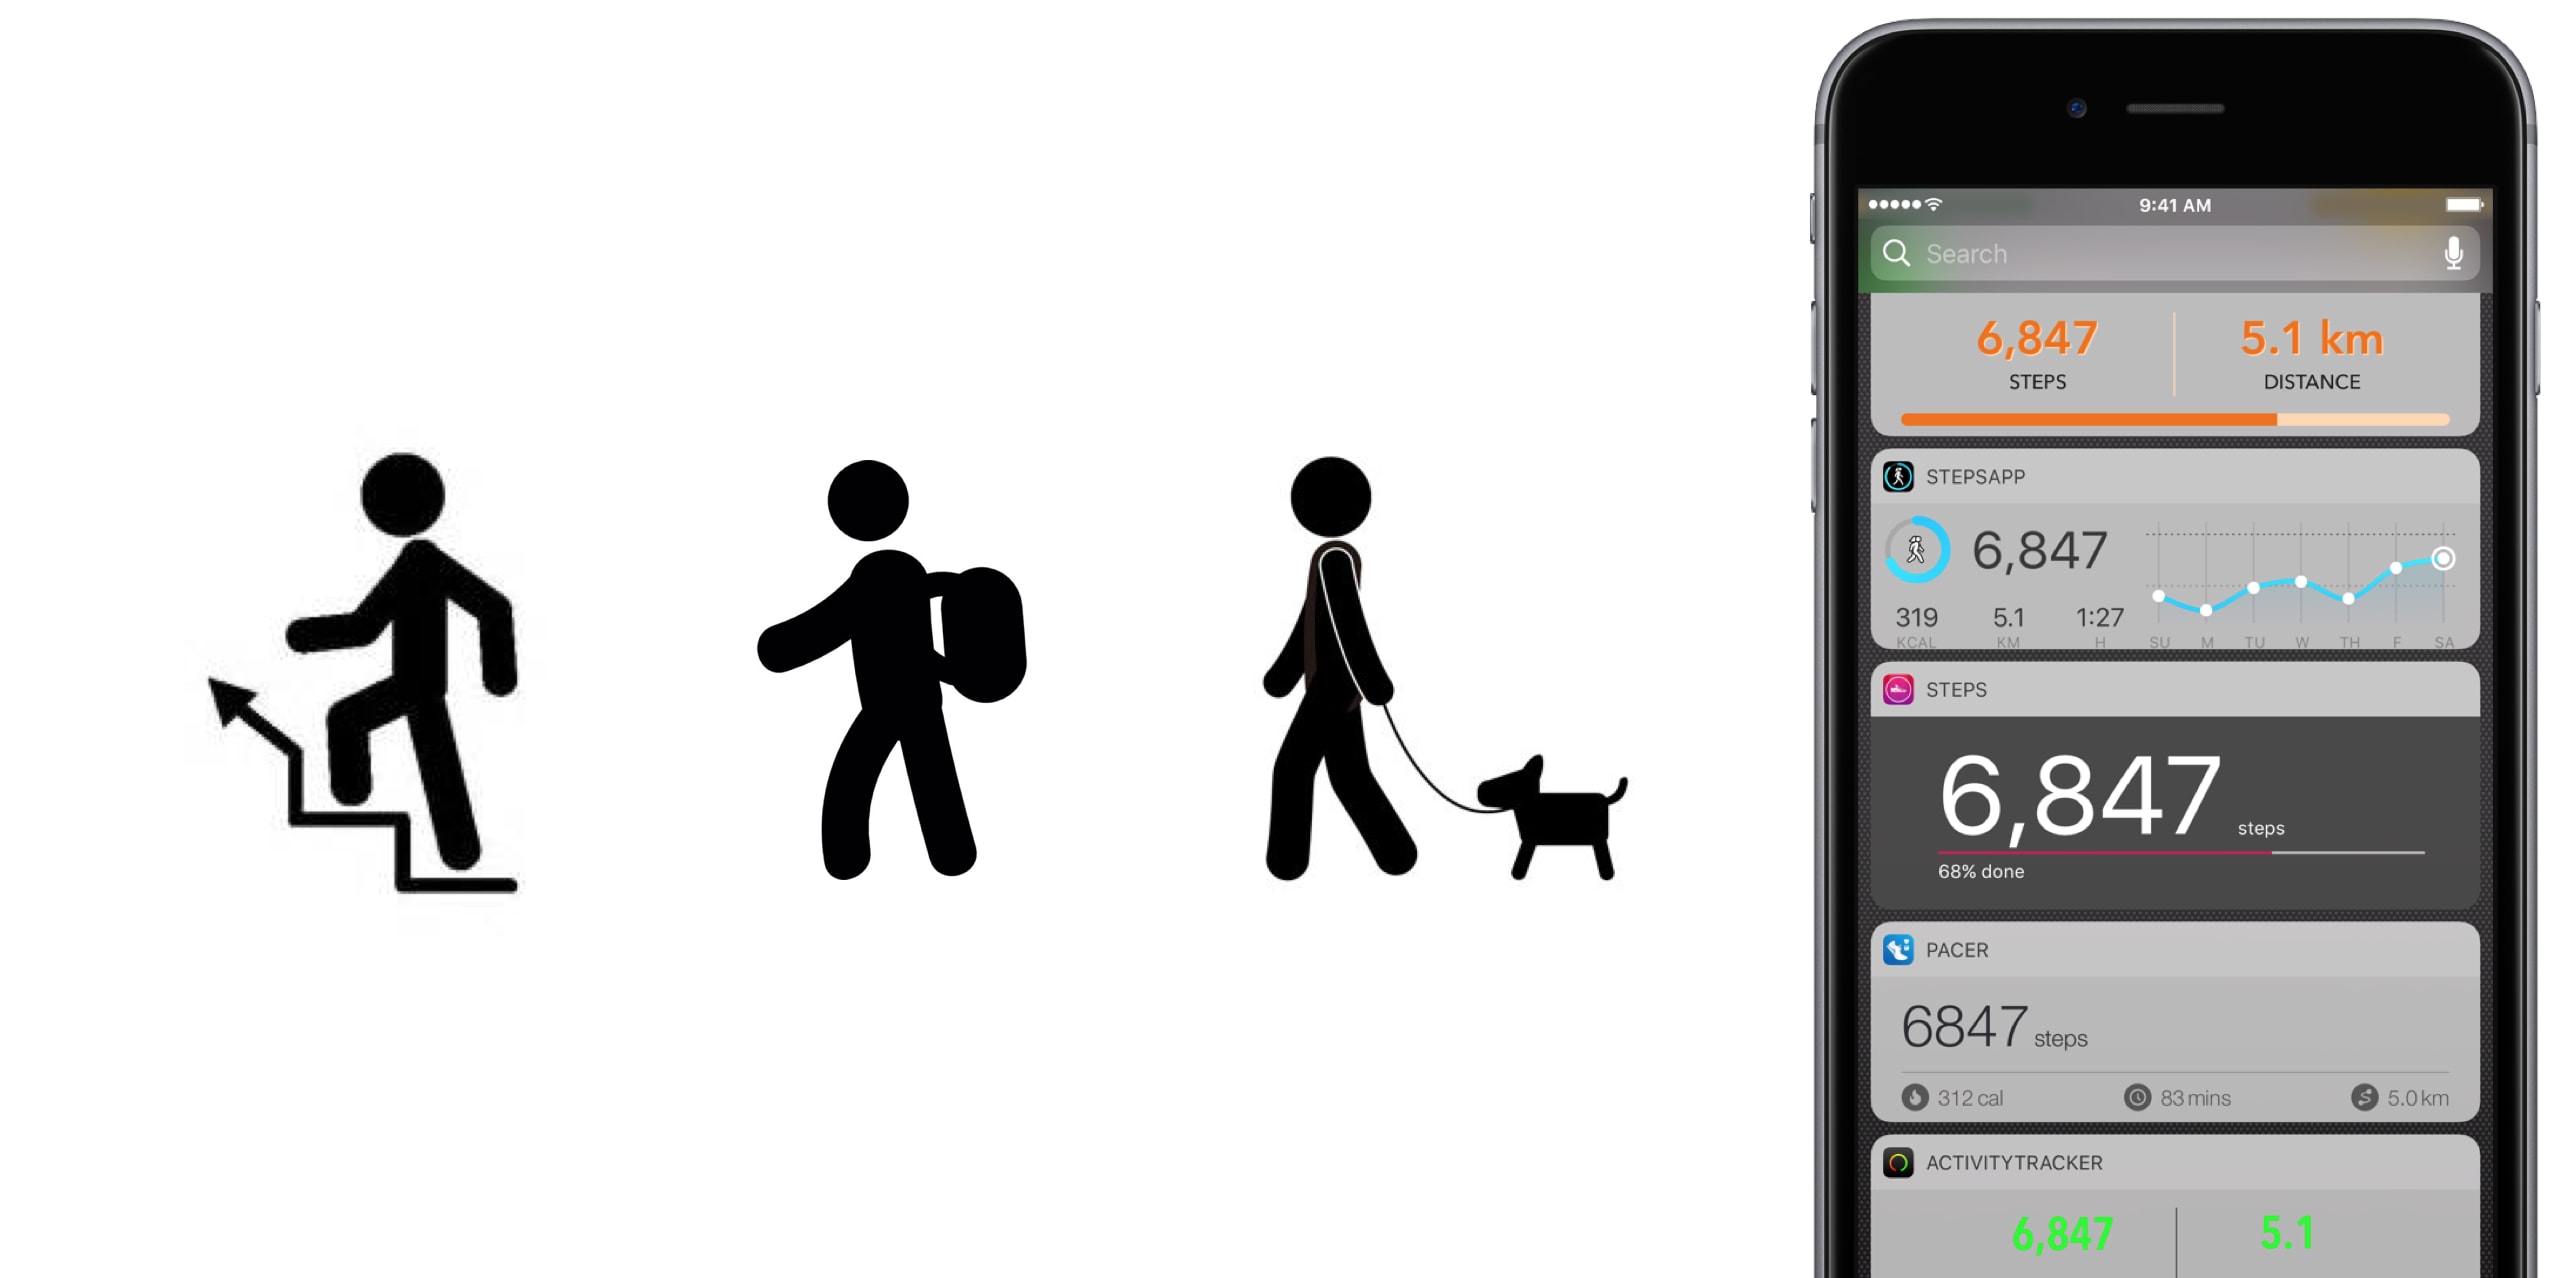 The best iPhone apps for tracking steps